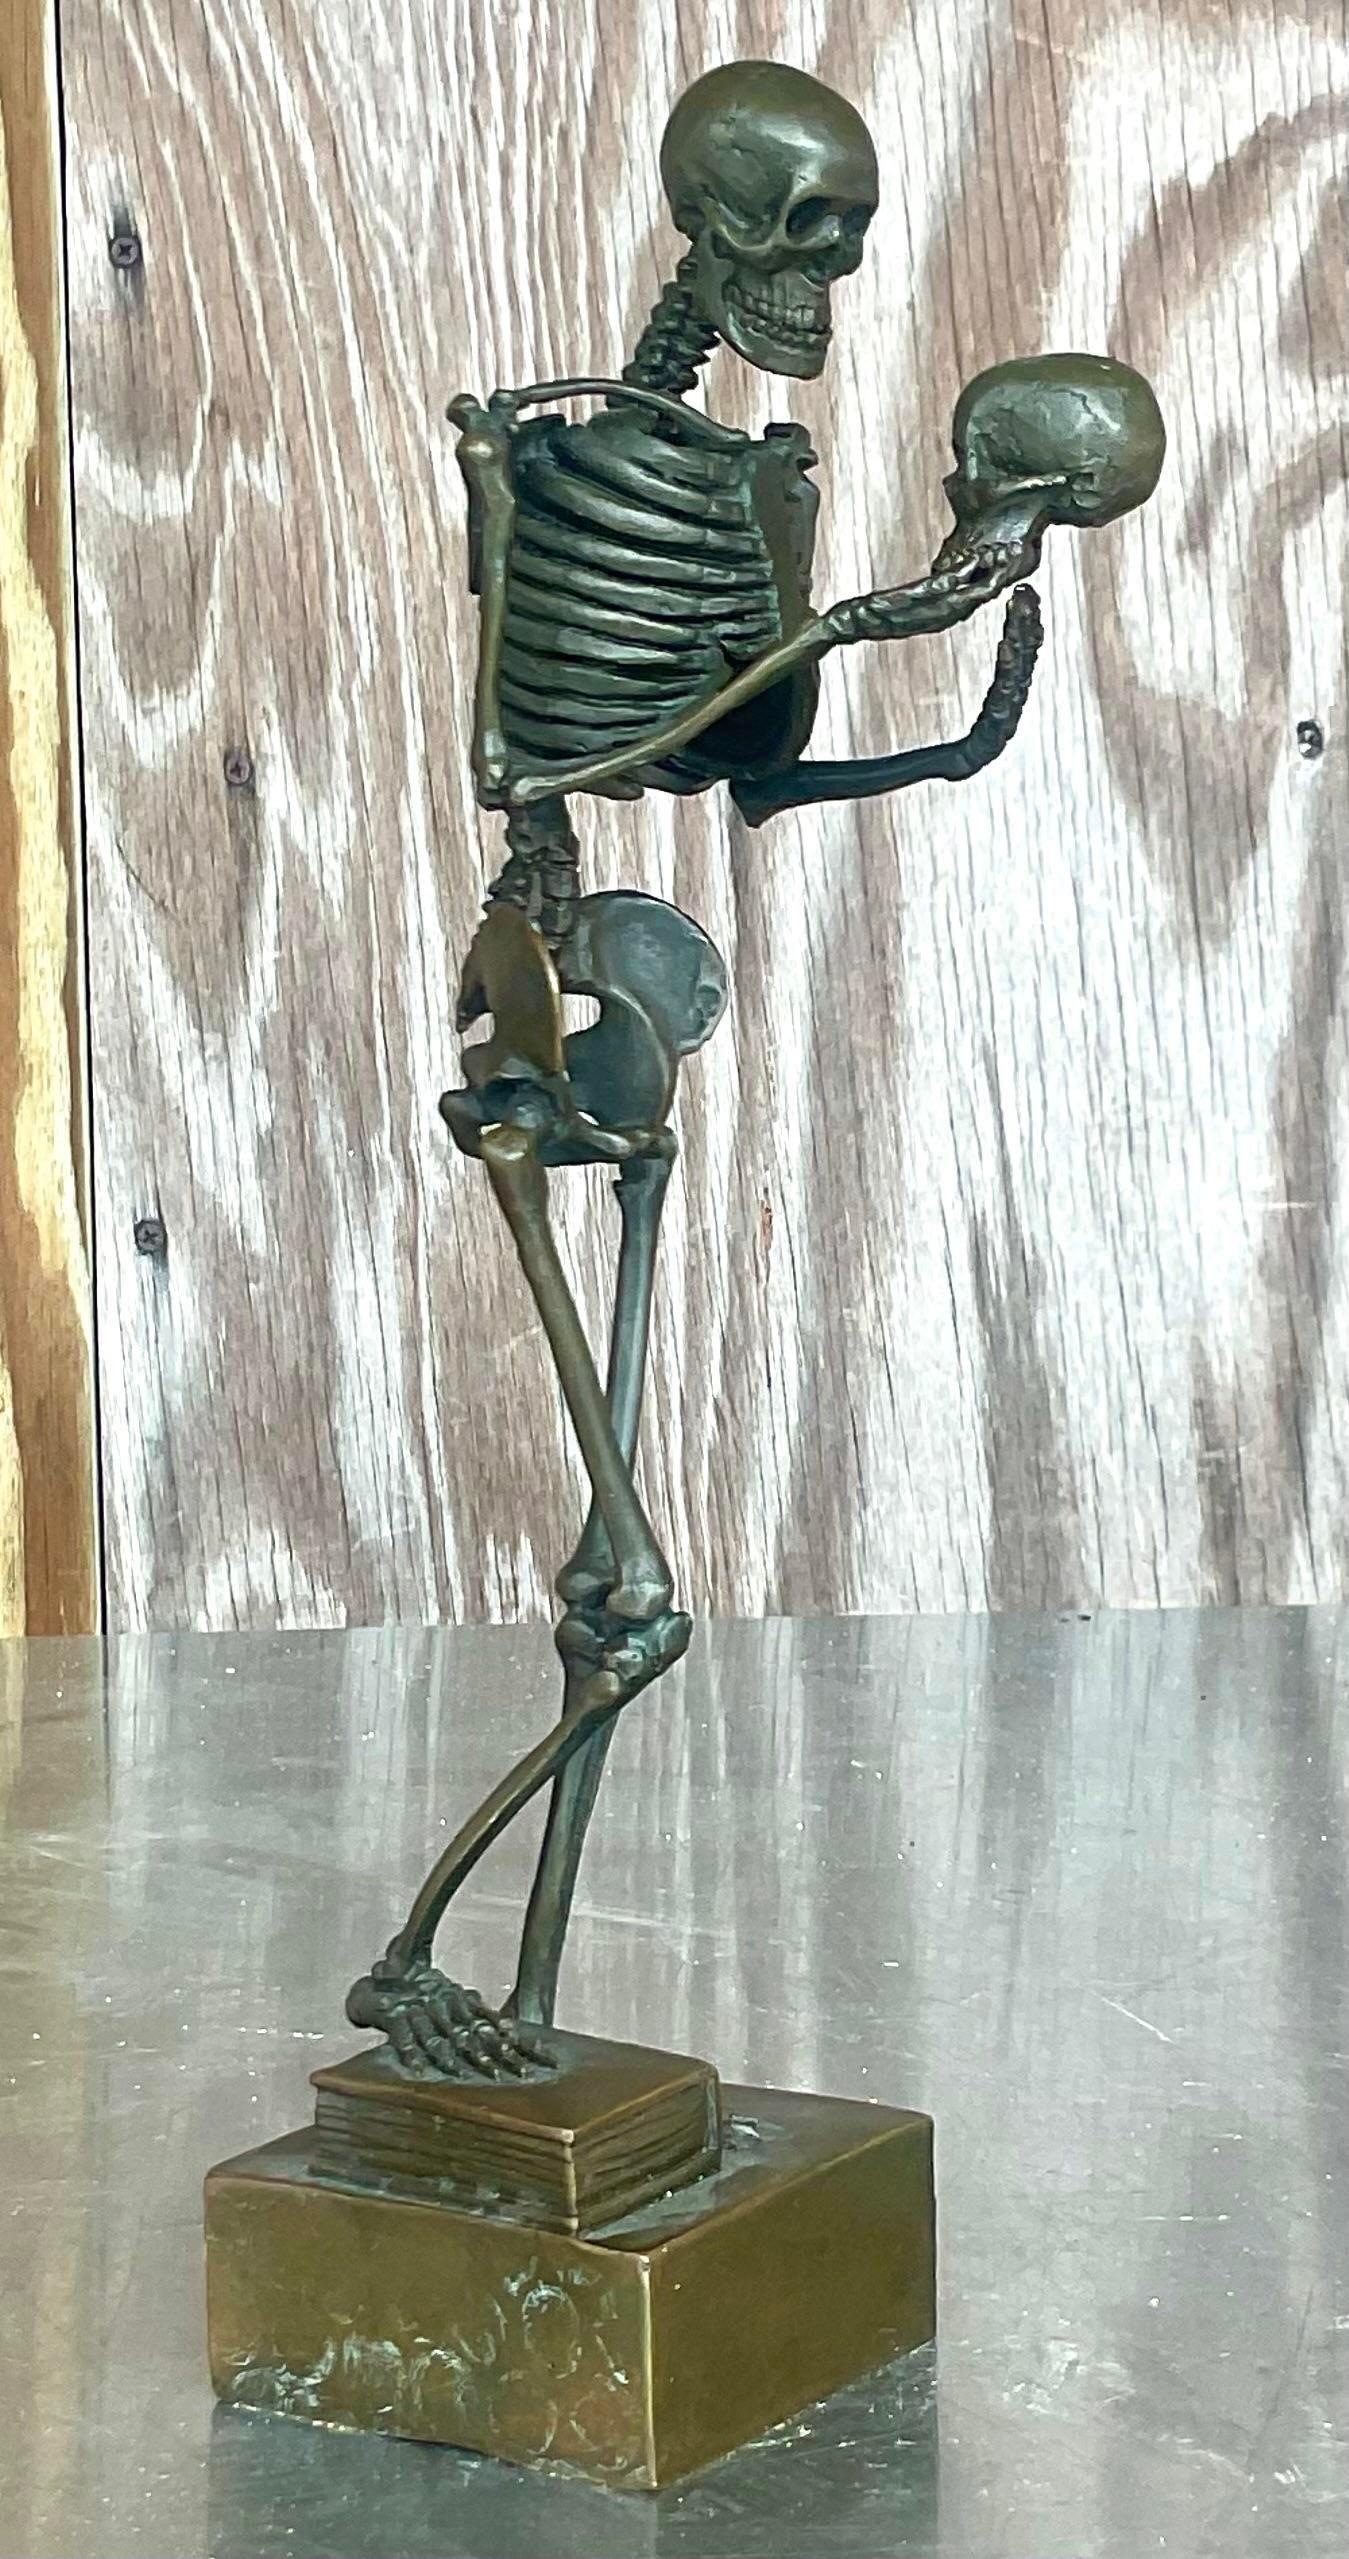 A fabulous vintage Boho signed bronze sculpture. A chic skeleton holding a skull. Sure to add a little zing to any space. Acquired from a Palm Beach estate.